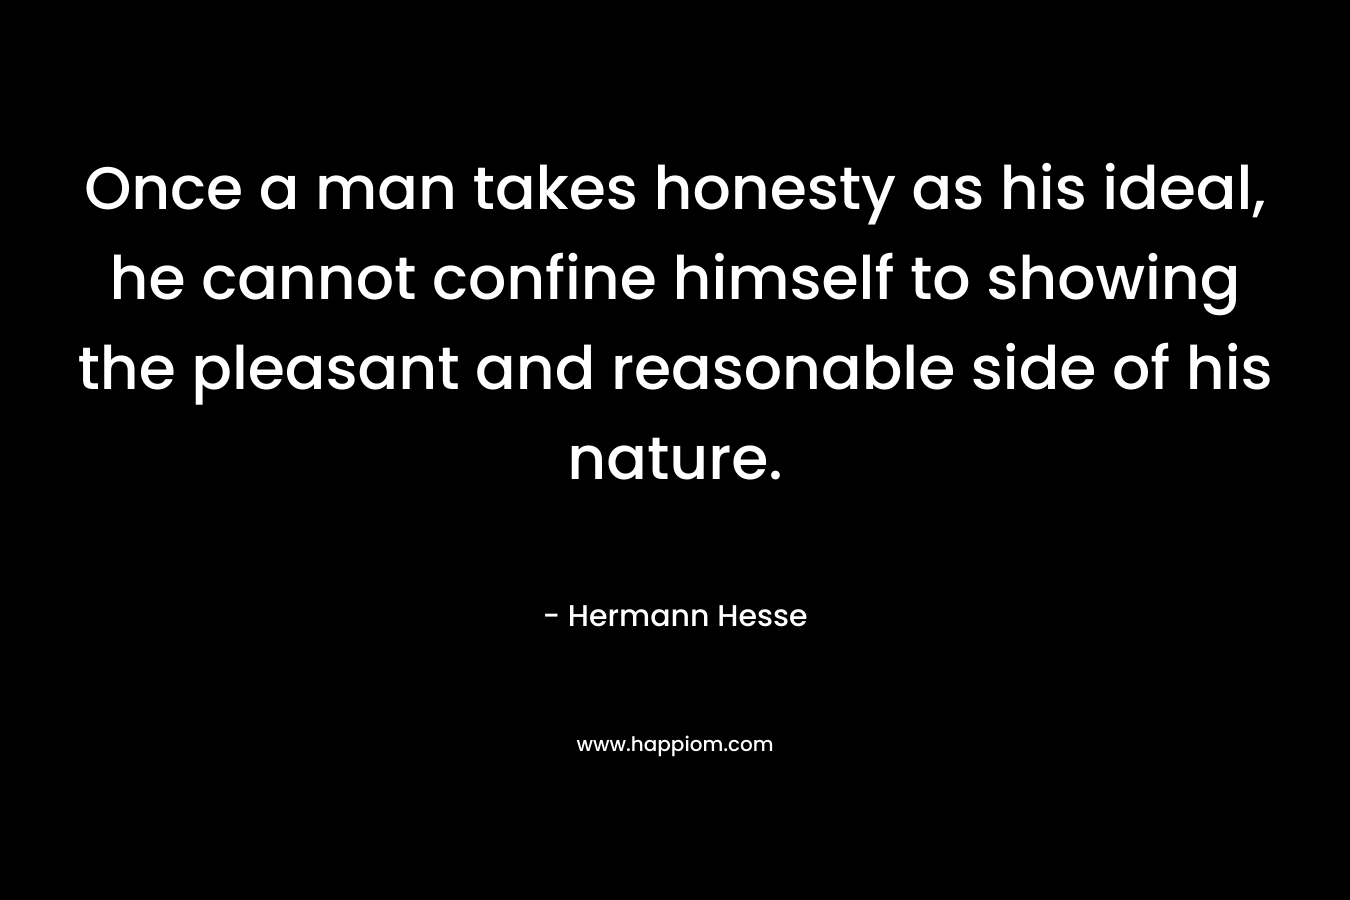 Once a man takes honesty as his ideal, he cannot confine himself to showing the pleasant and reasonable side of his nature. – Hermann Hesse